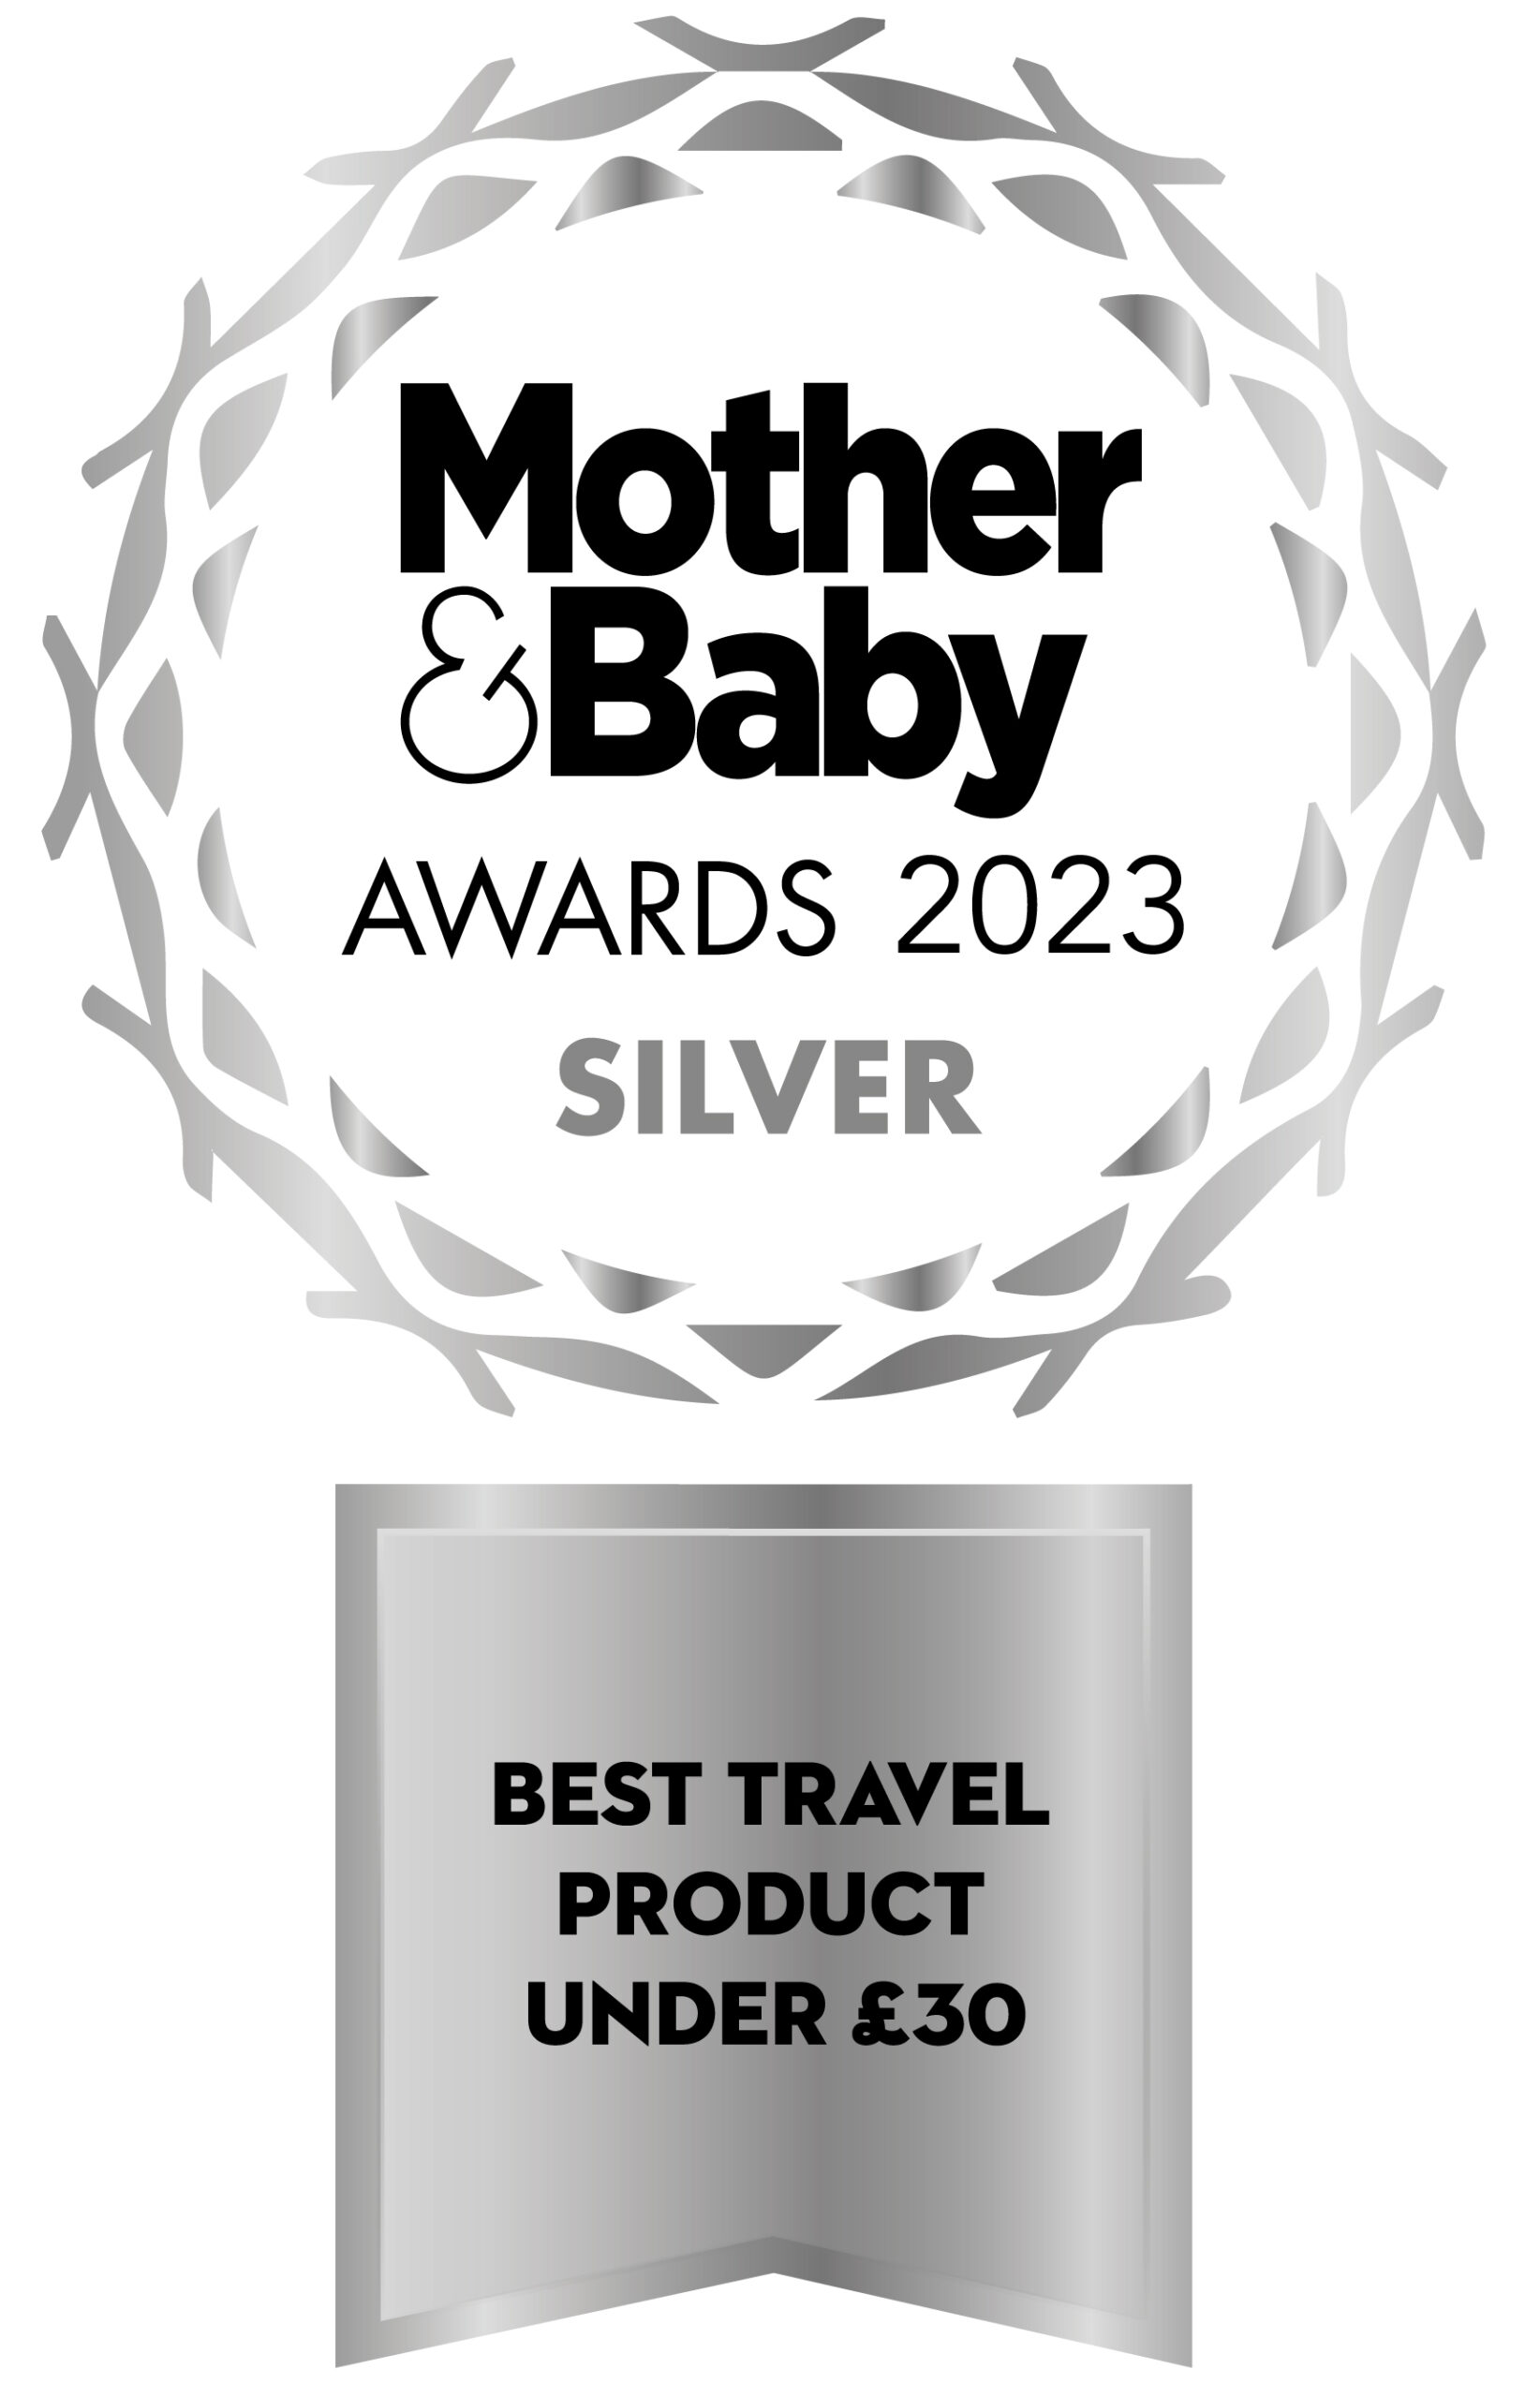 ESAC Bottles Best Travel Product Under £30 - Silver